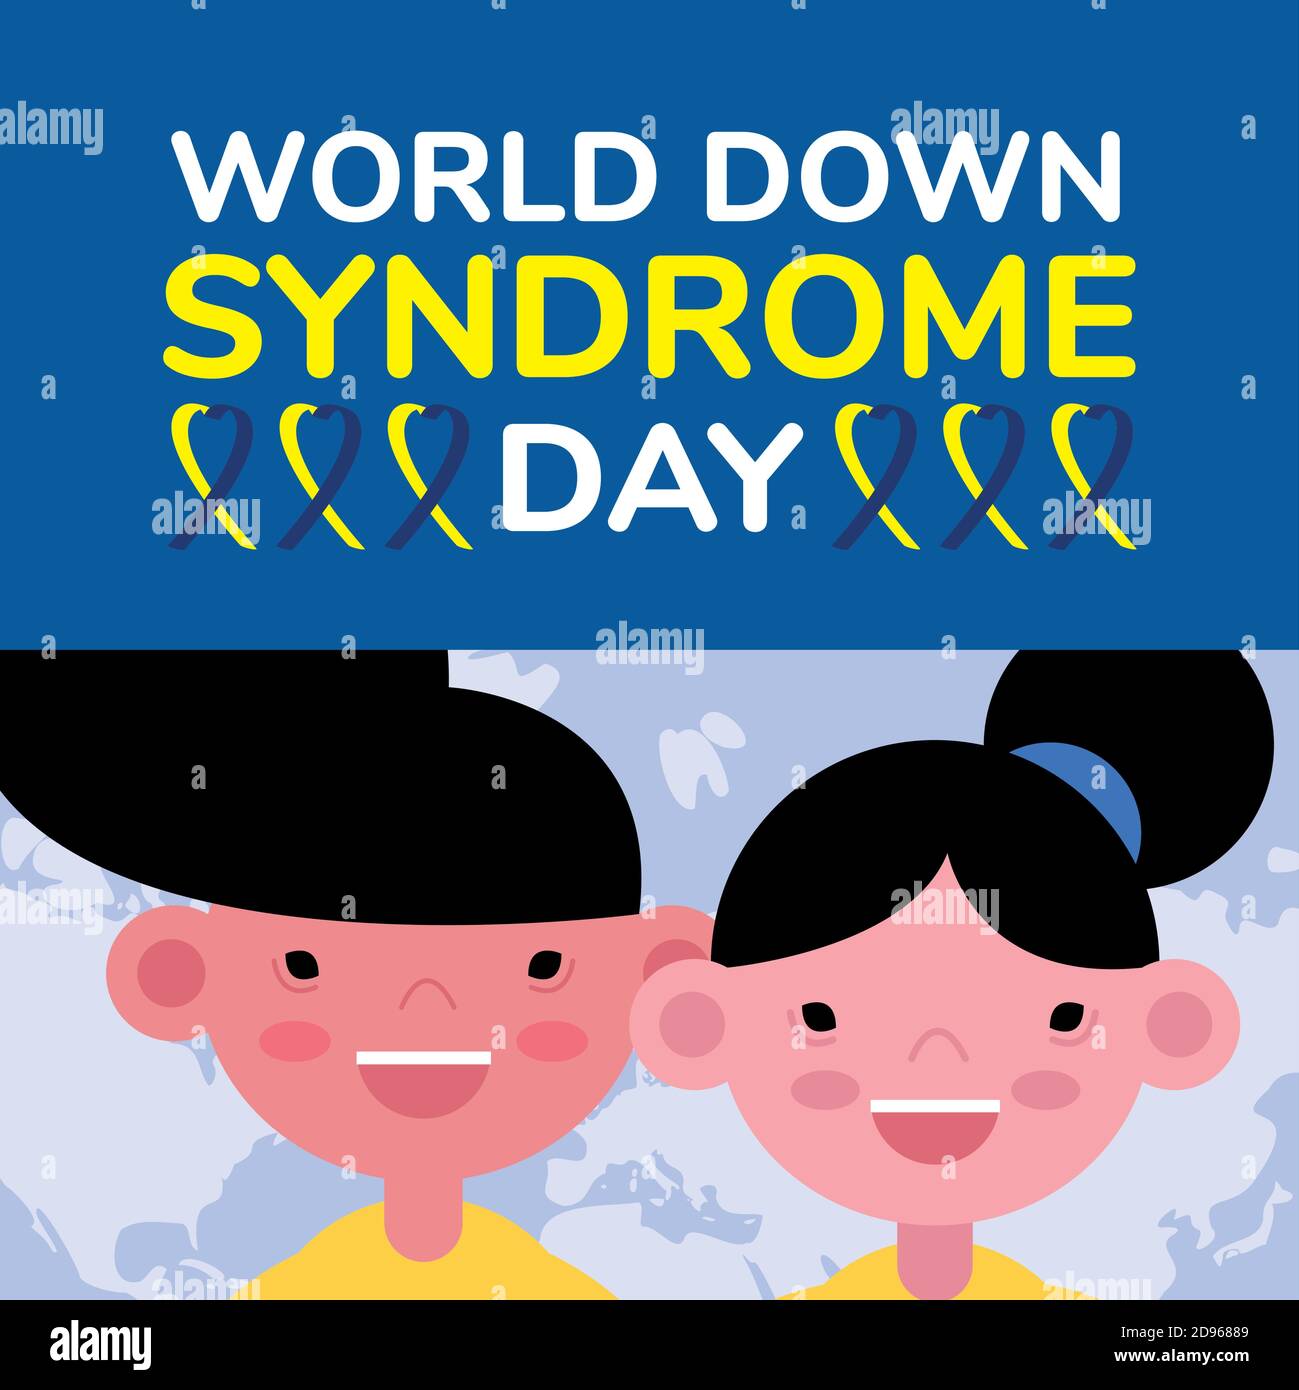 world down sindrome day campaign poster with kids vector illustration design Stock Vector